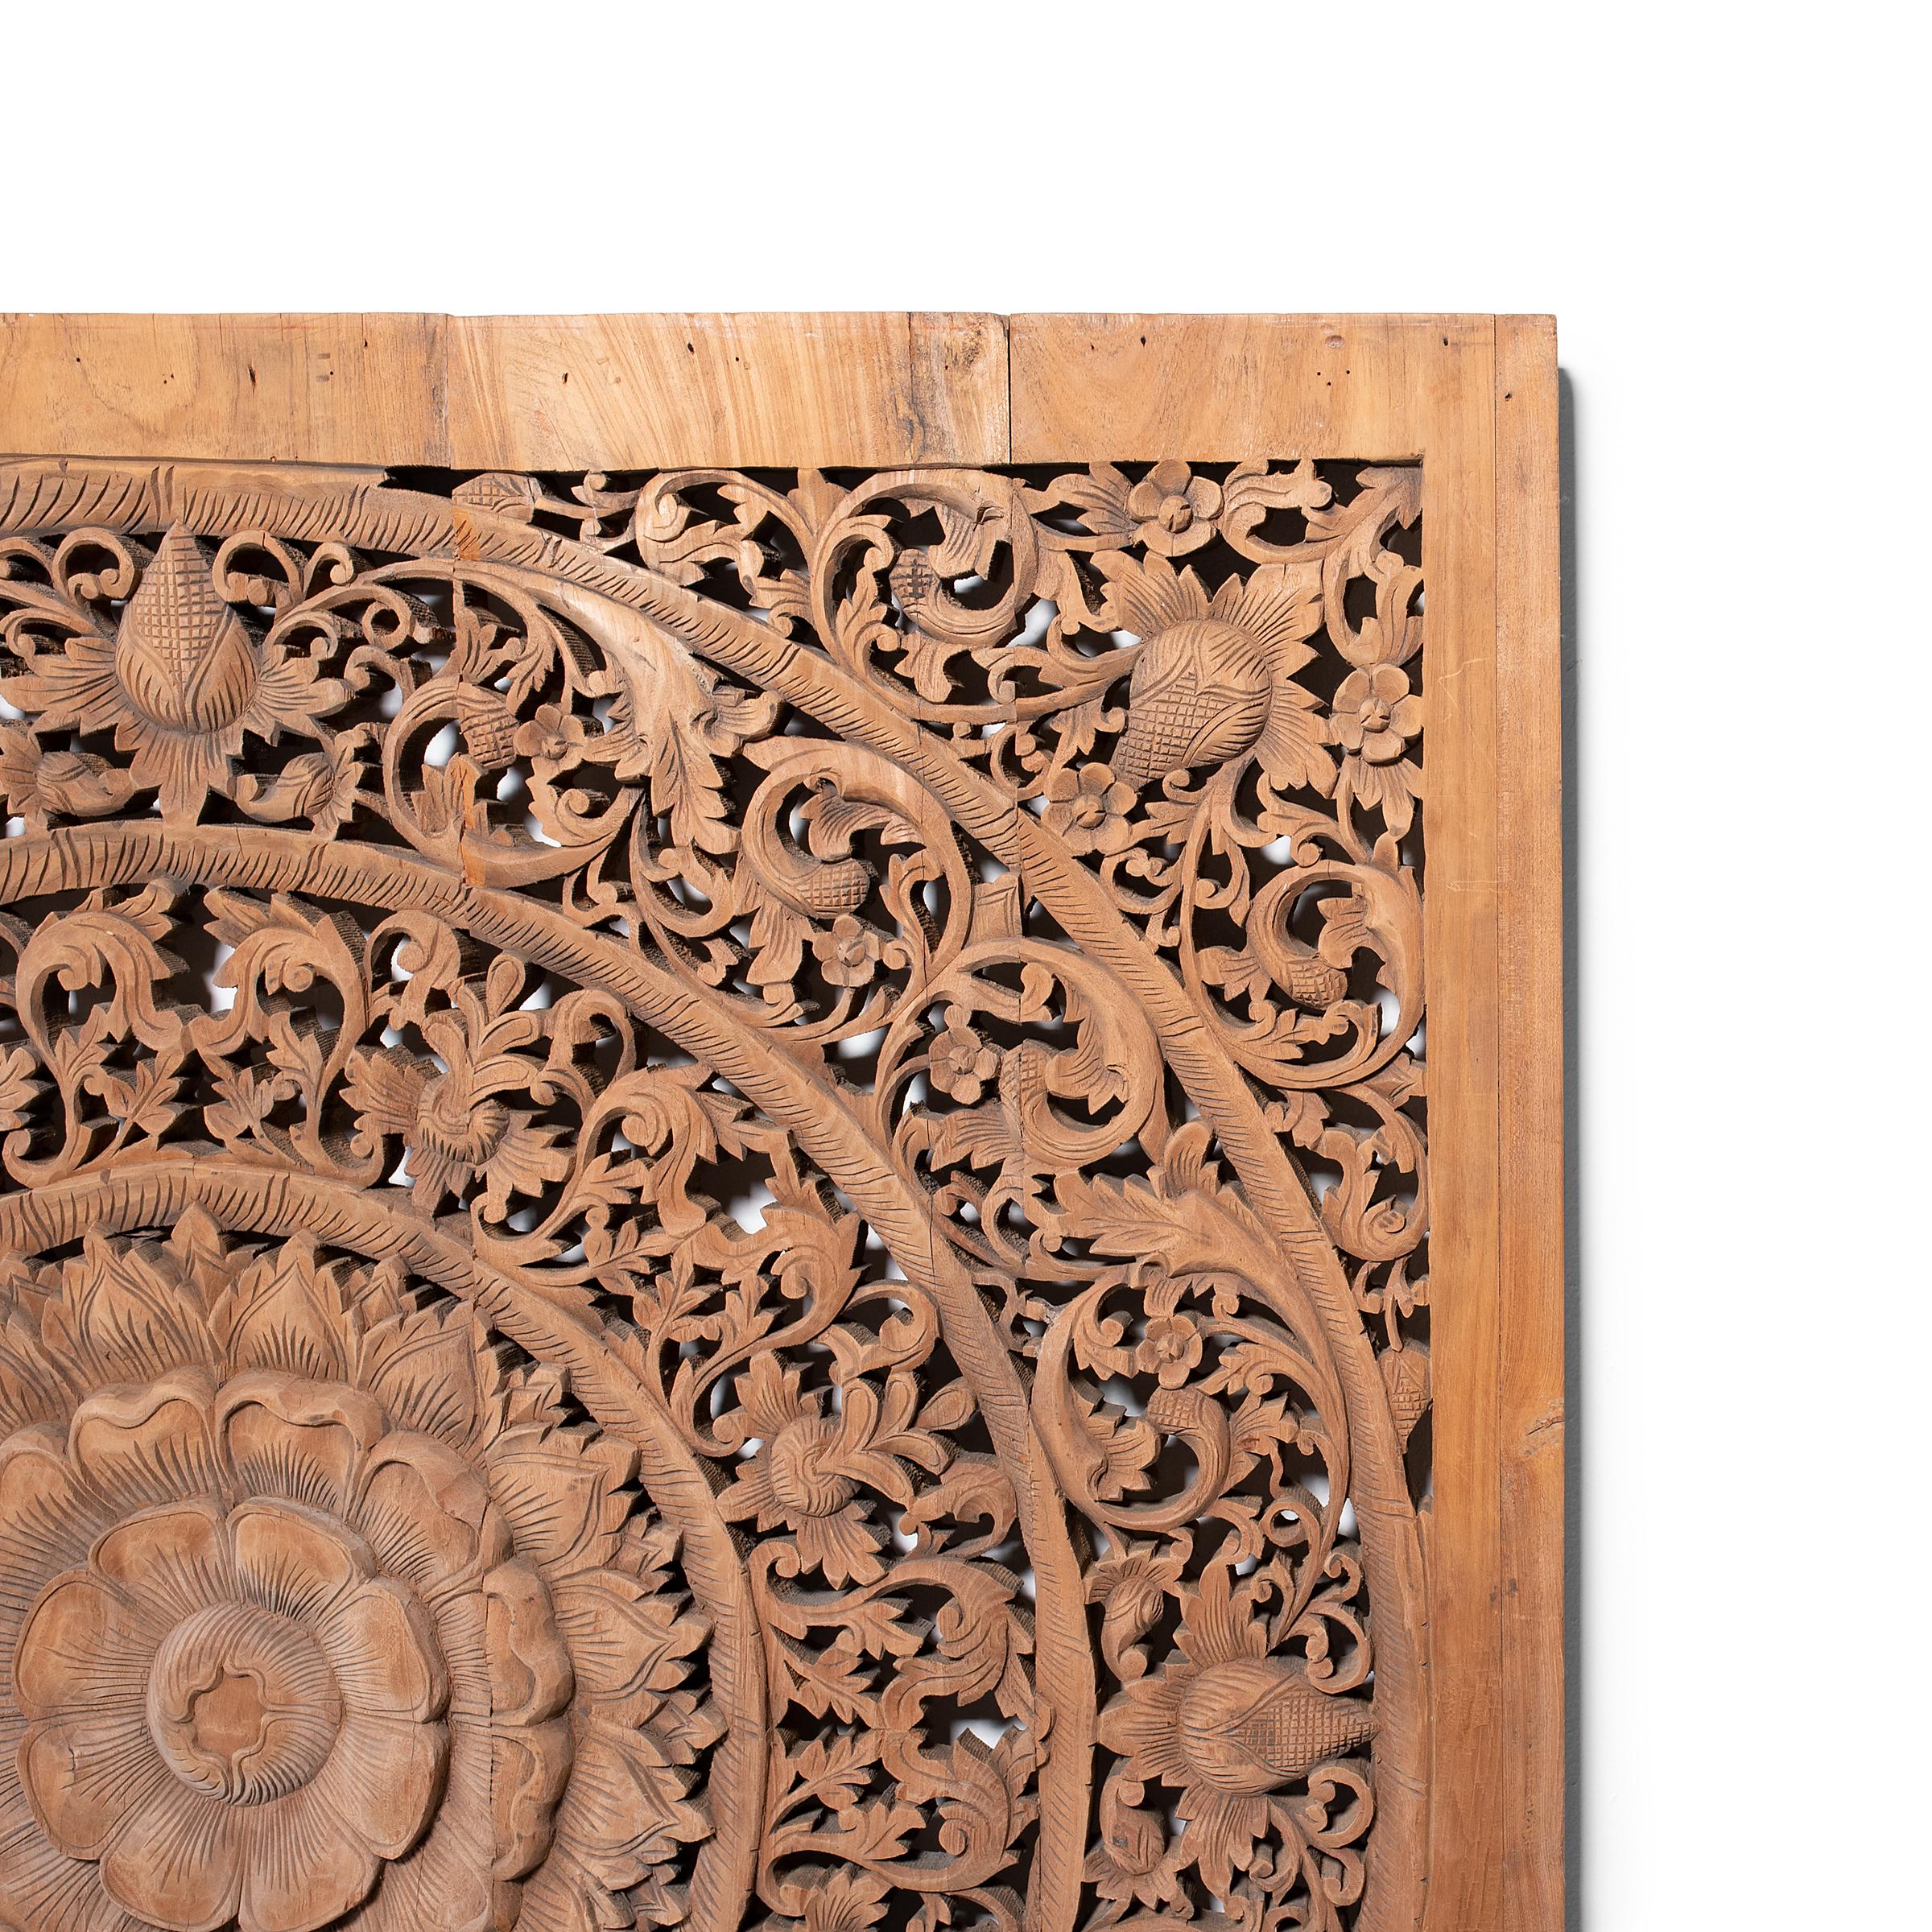 Worked from reclaimed teak boards, this large, five-board panel is hand-carved with a decorative pierced mandala design in the style of Thai or Balinese fretwork screens. Concentric circles of foliate scrollwork radiate from a central lotus blossom,